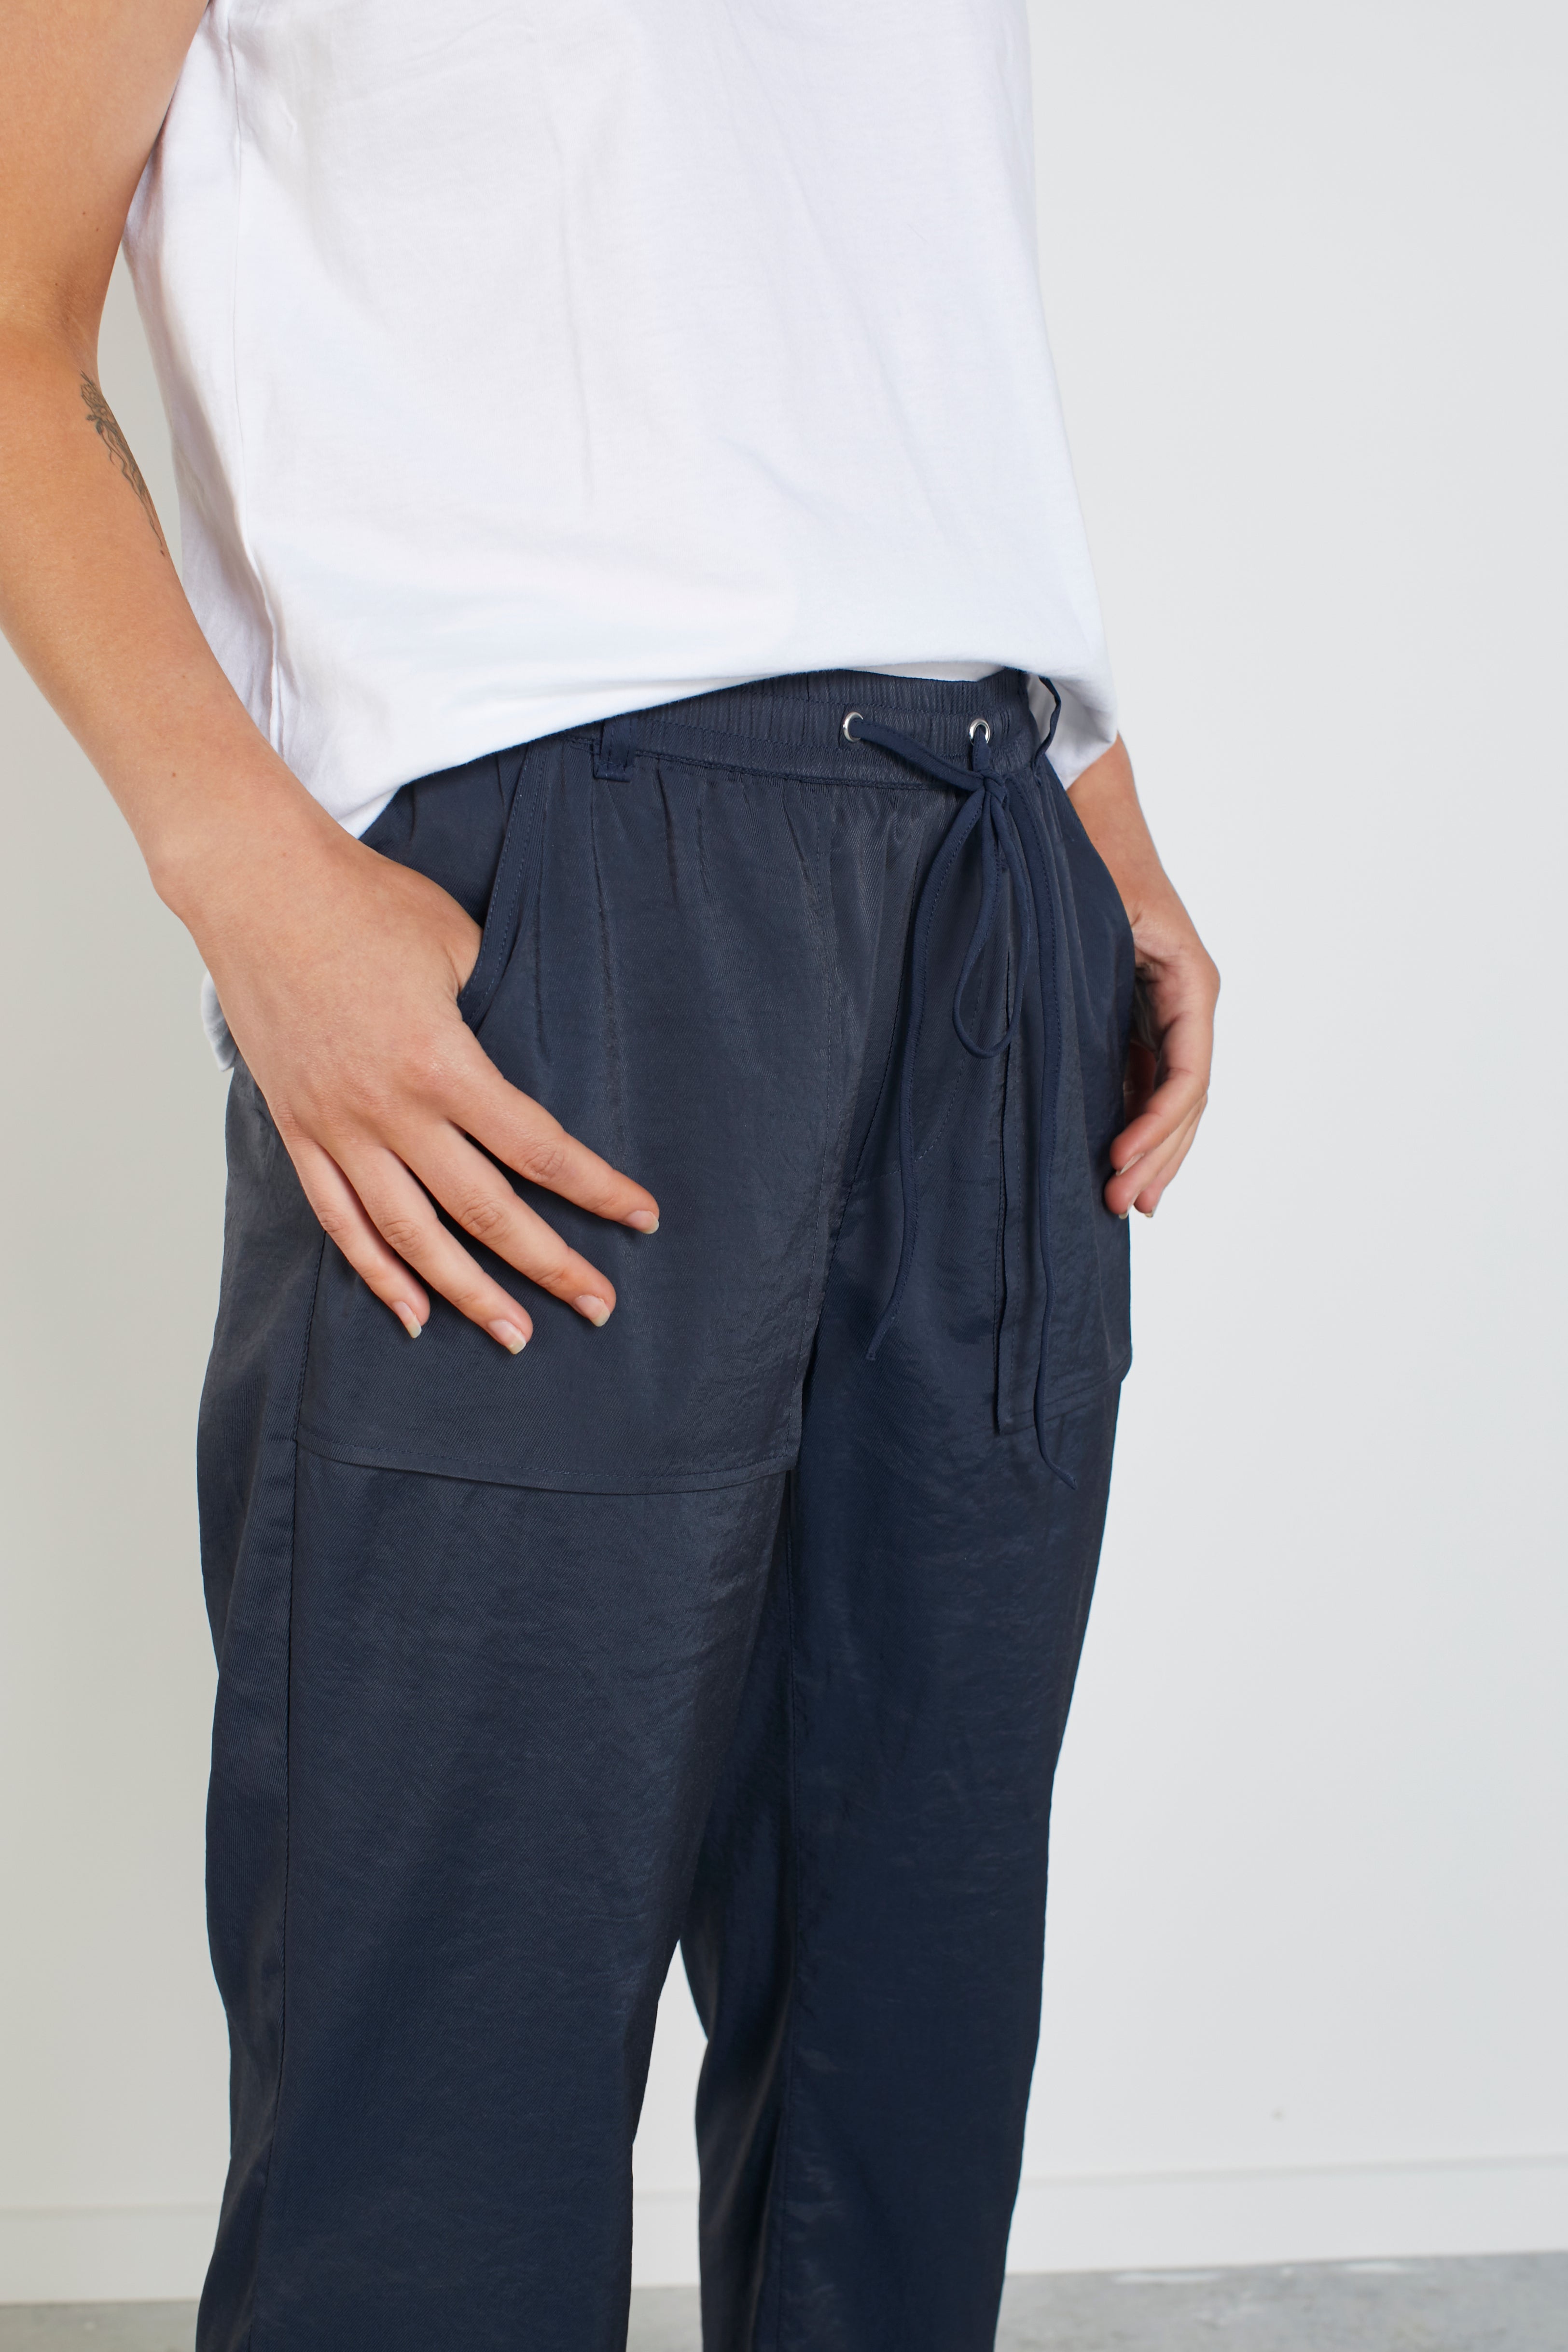 4019 - Lucy Pant - Navy